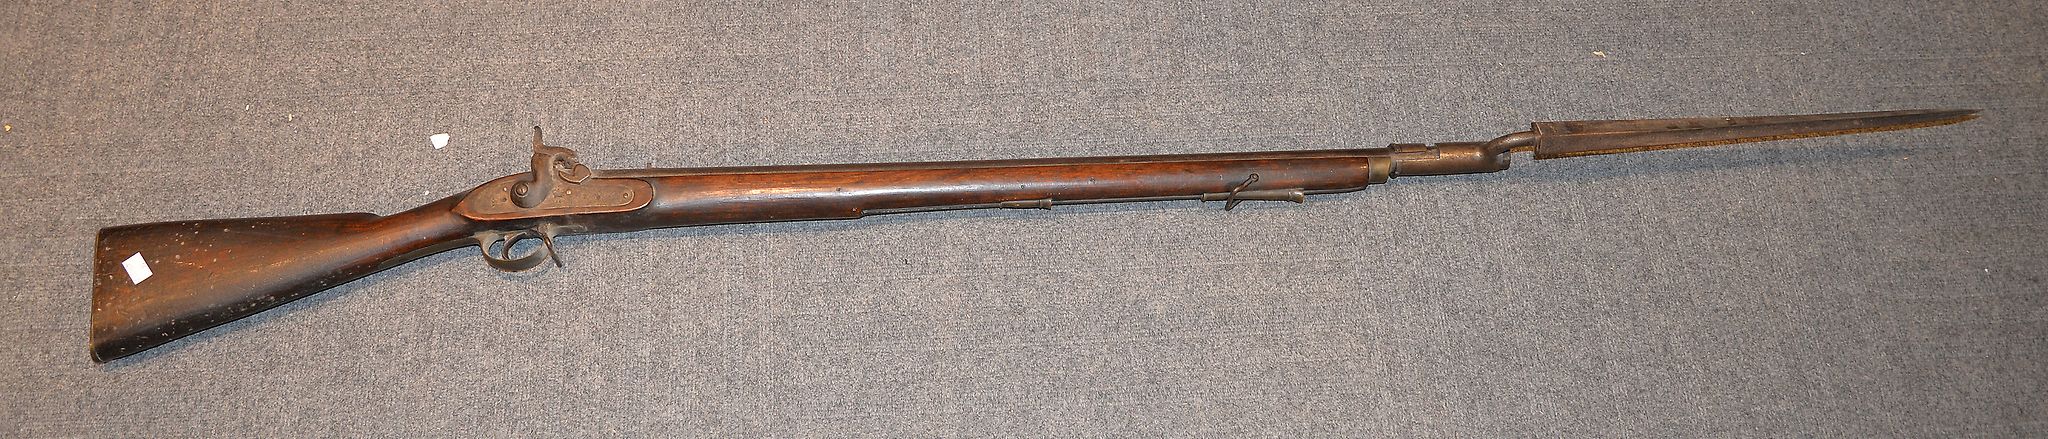 A Gilks Wilson Co. military percussion musket and socket bayonet, the lock plate stamped TOWER and